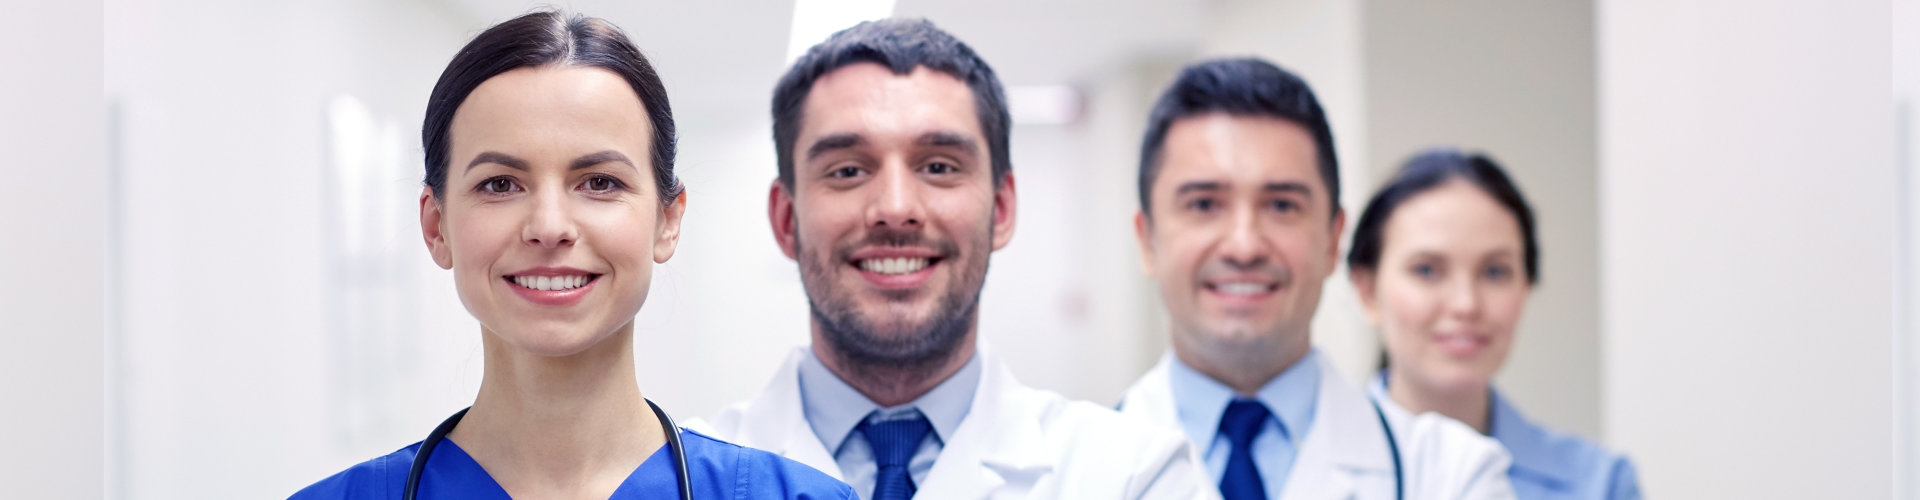 image of the four healthcare staff smiling